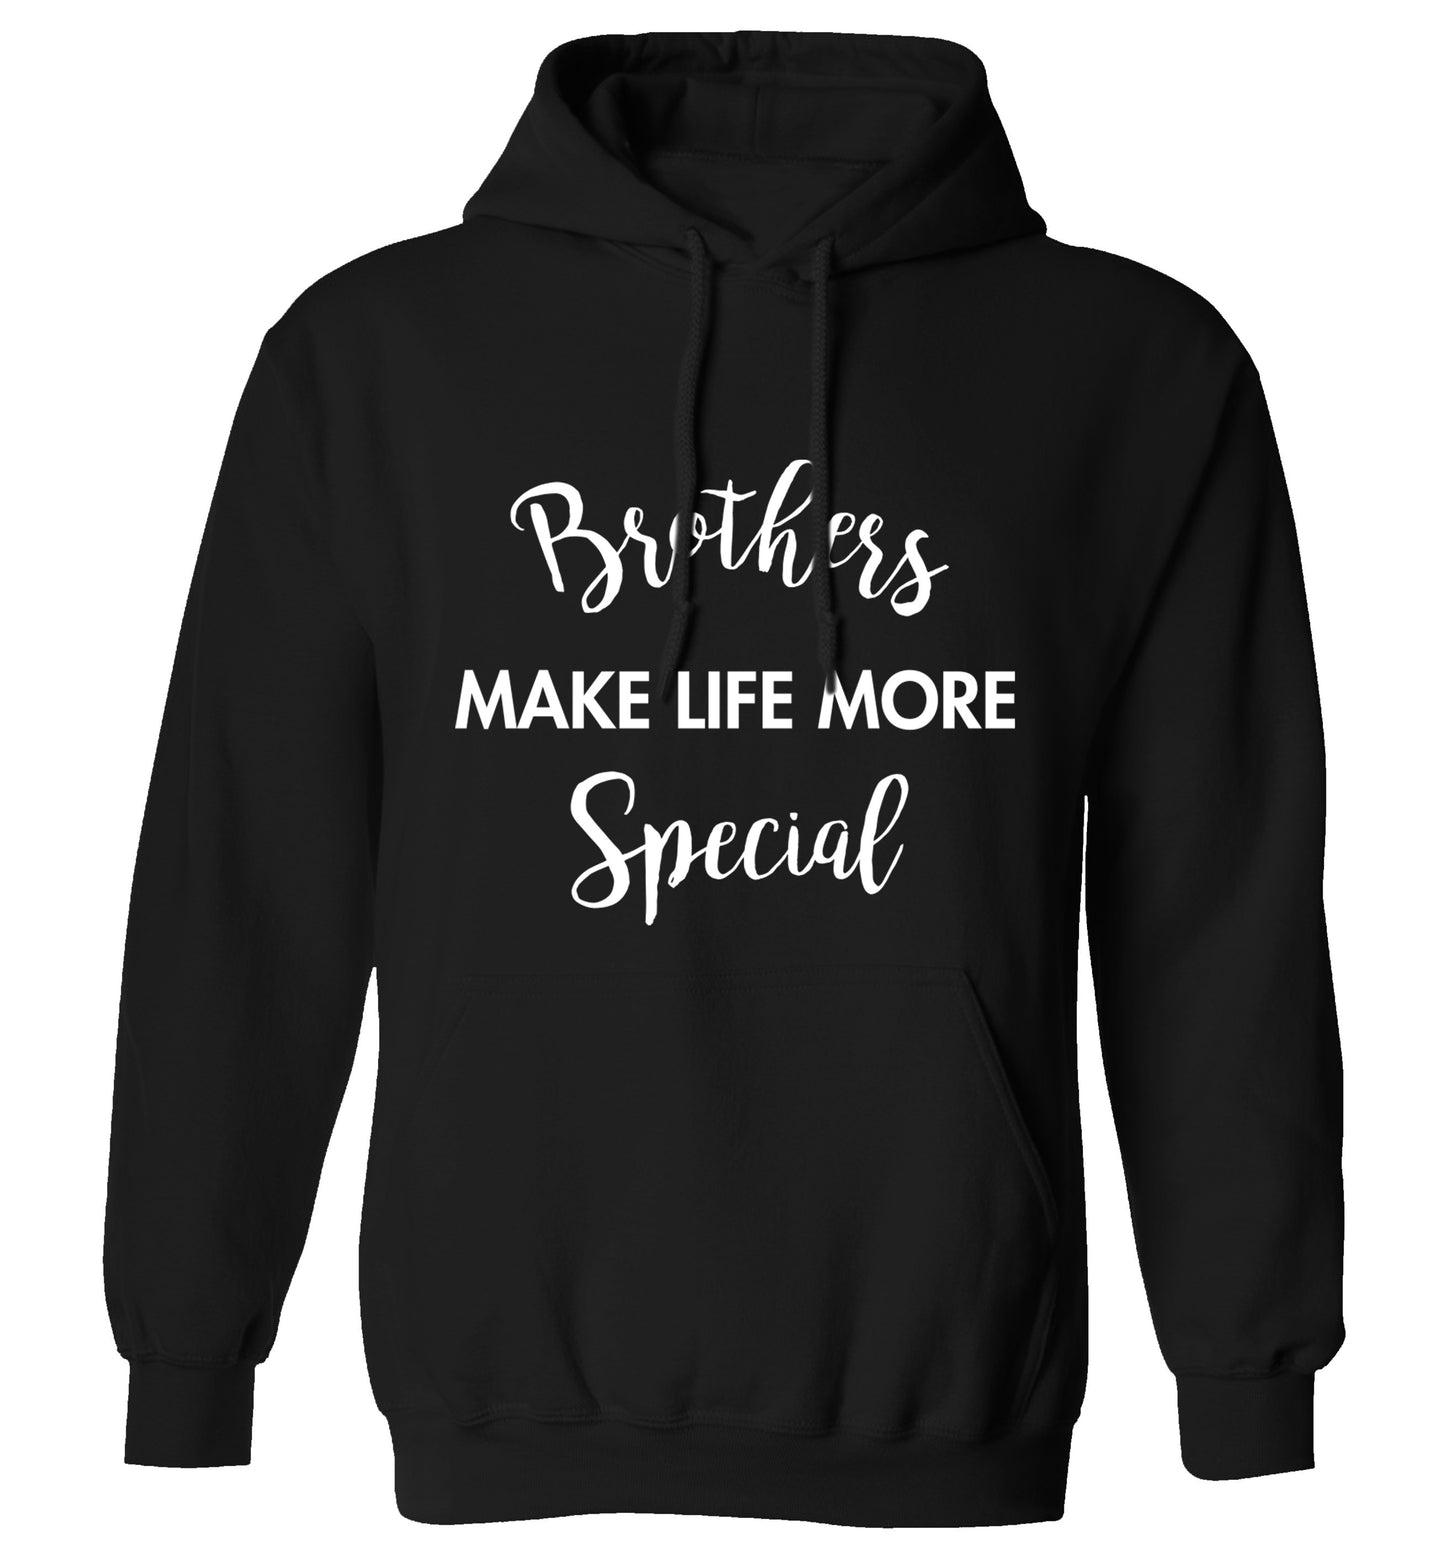 Brothers make life more special adults unisex black hoodie 2XL